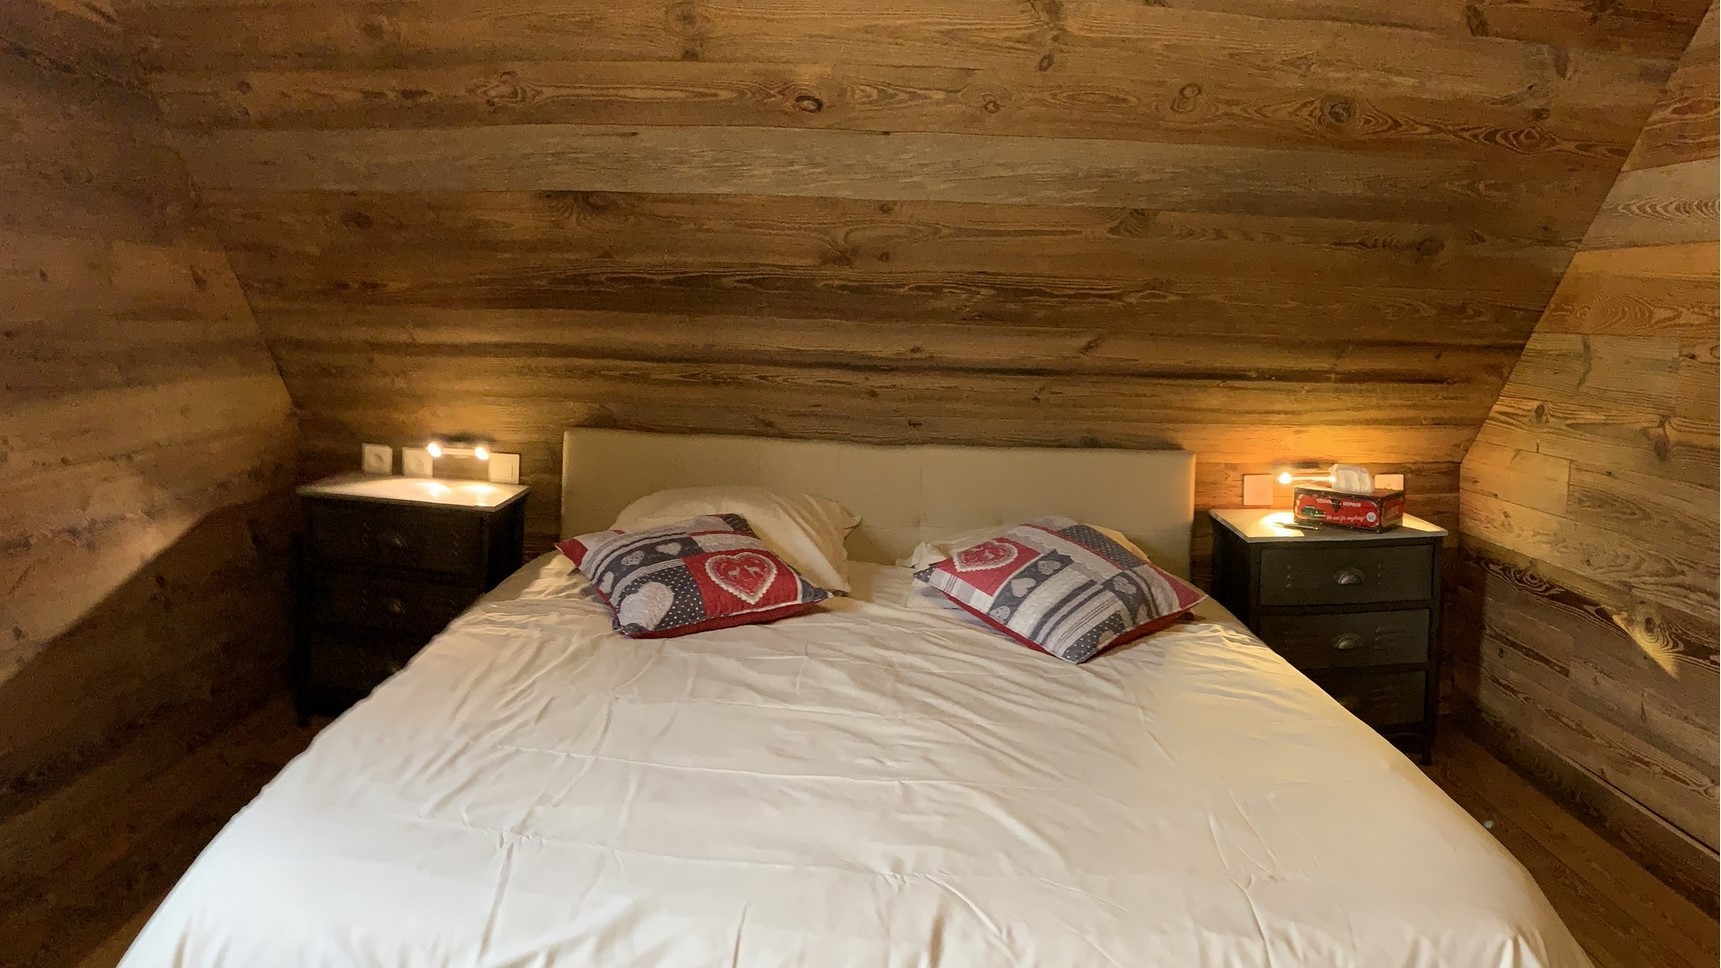 Chalet l'Anorak, Tyrolean bedroom, King Size bed, headboard and bedside tables